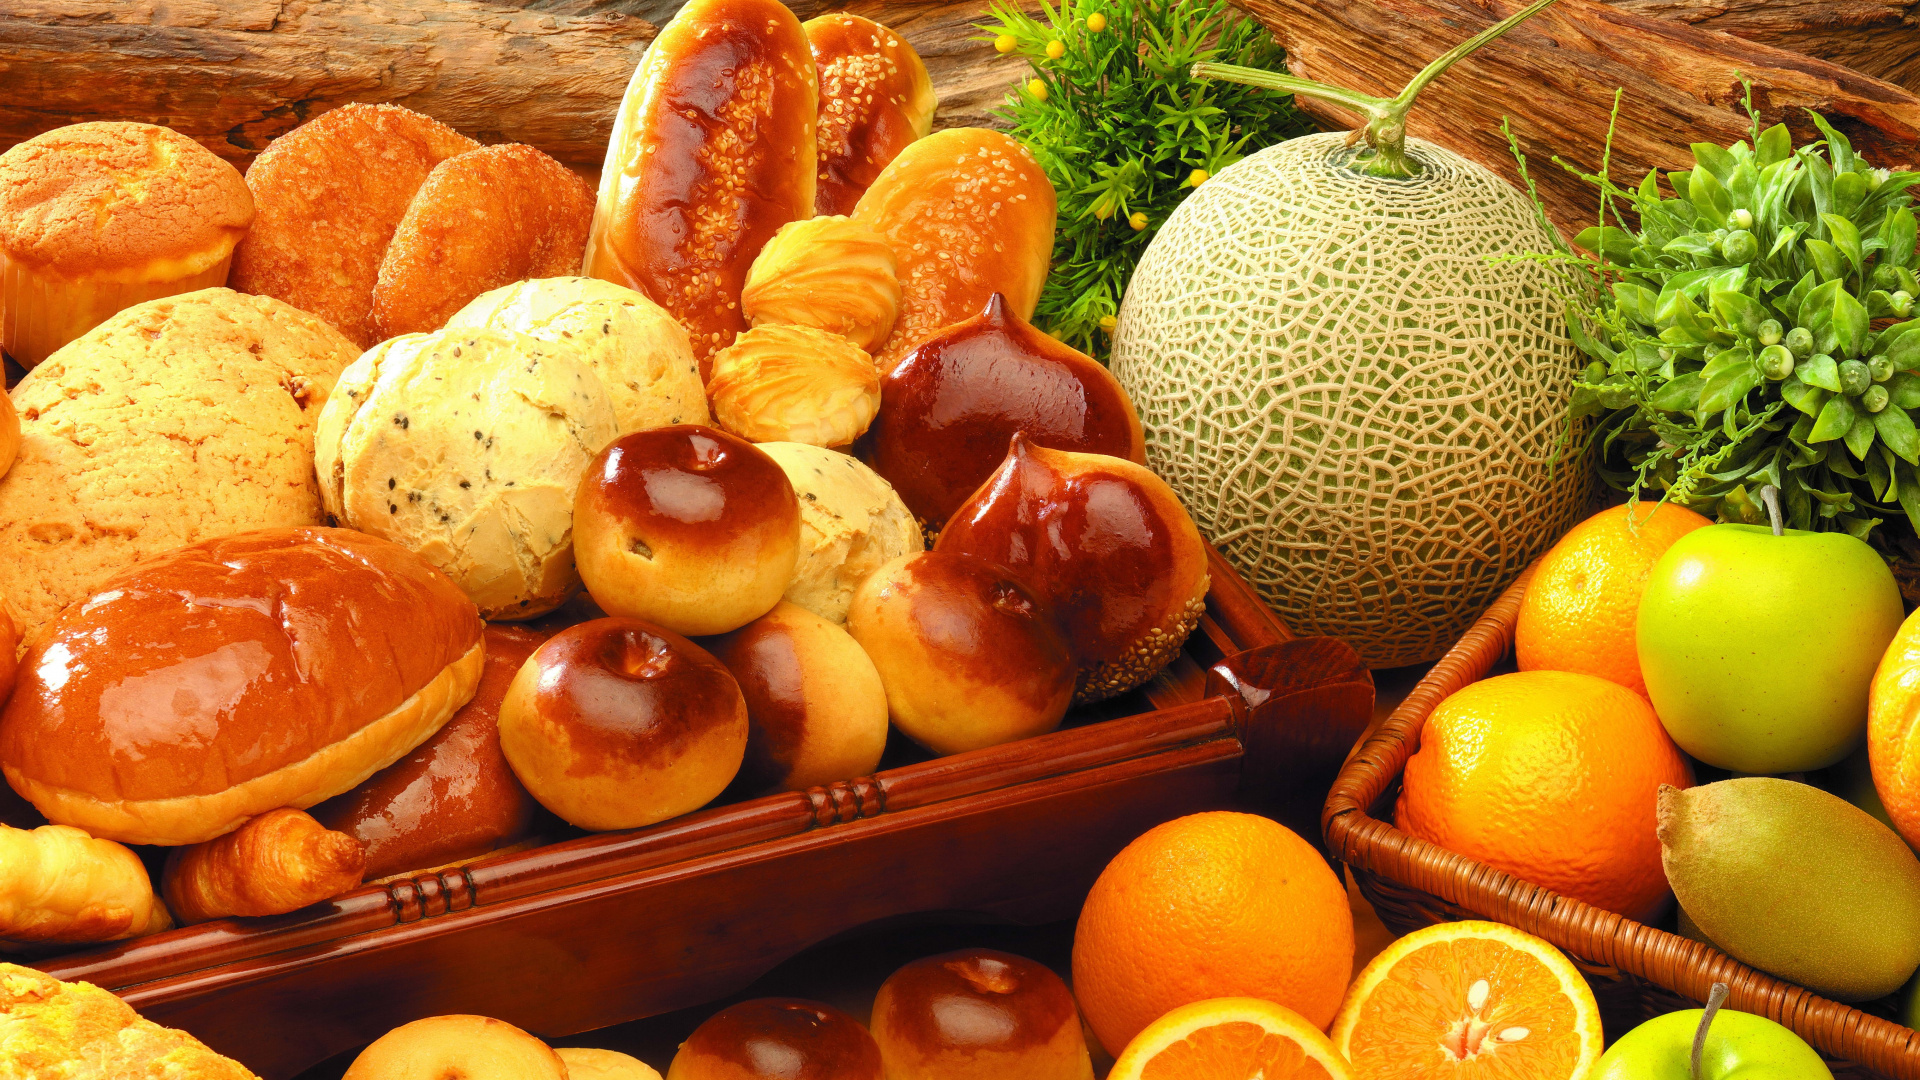 Orange Fruits on Brown Wooden Tray. Wallpaper in 1920x1080 Resolution